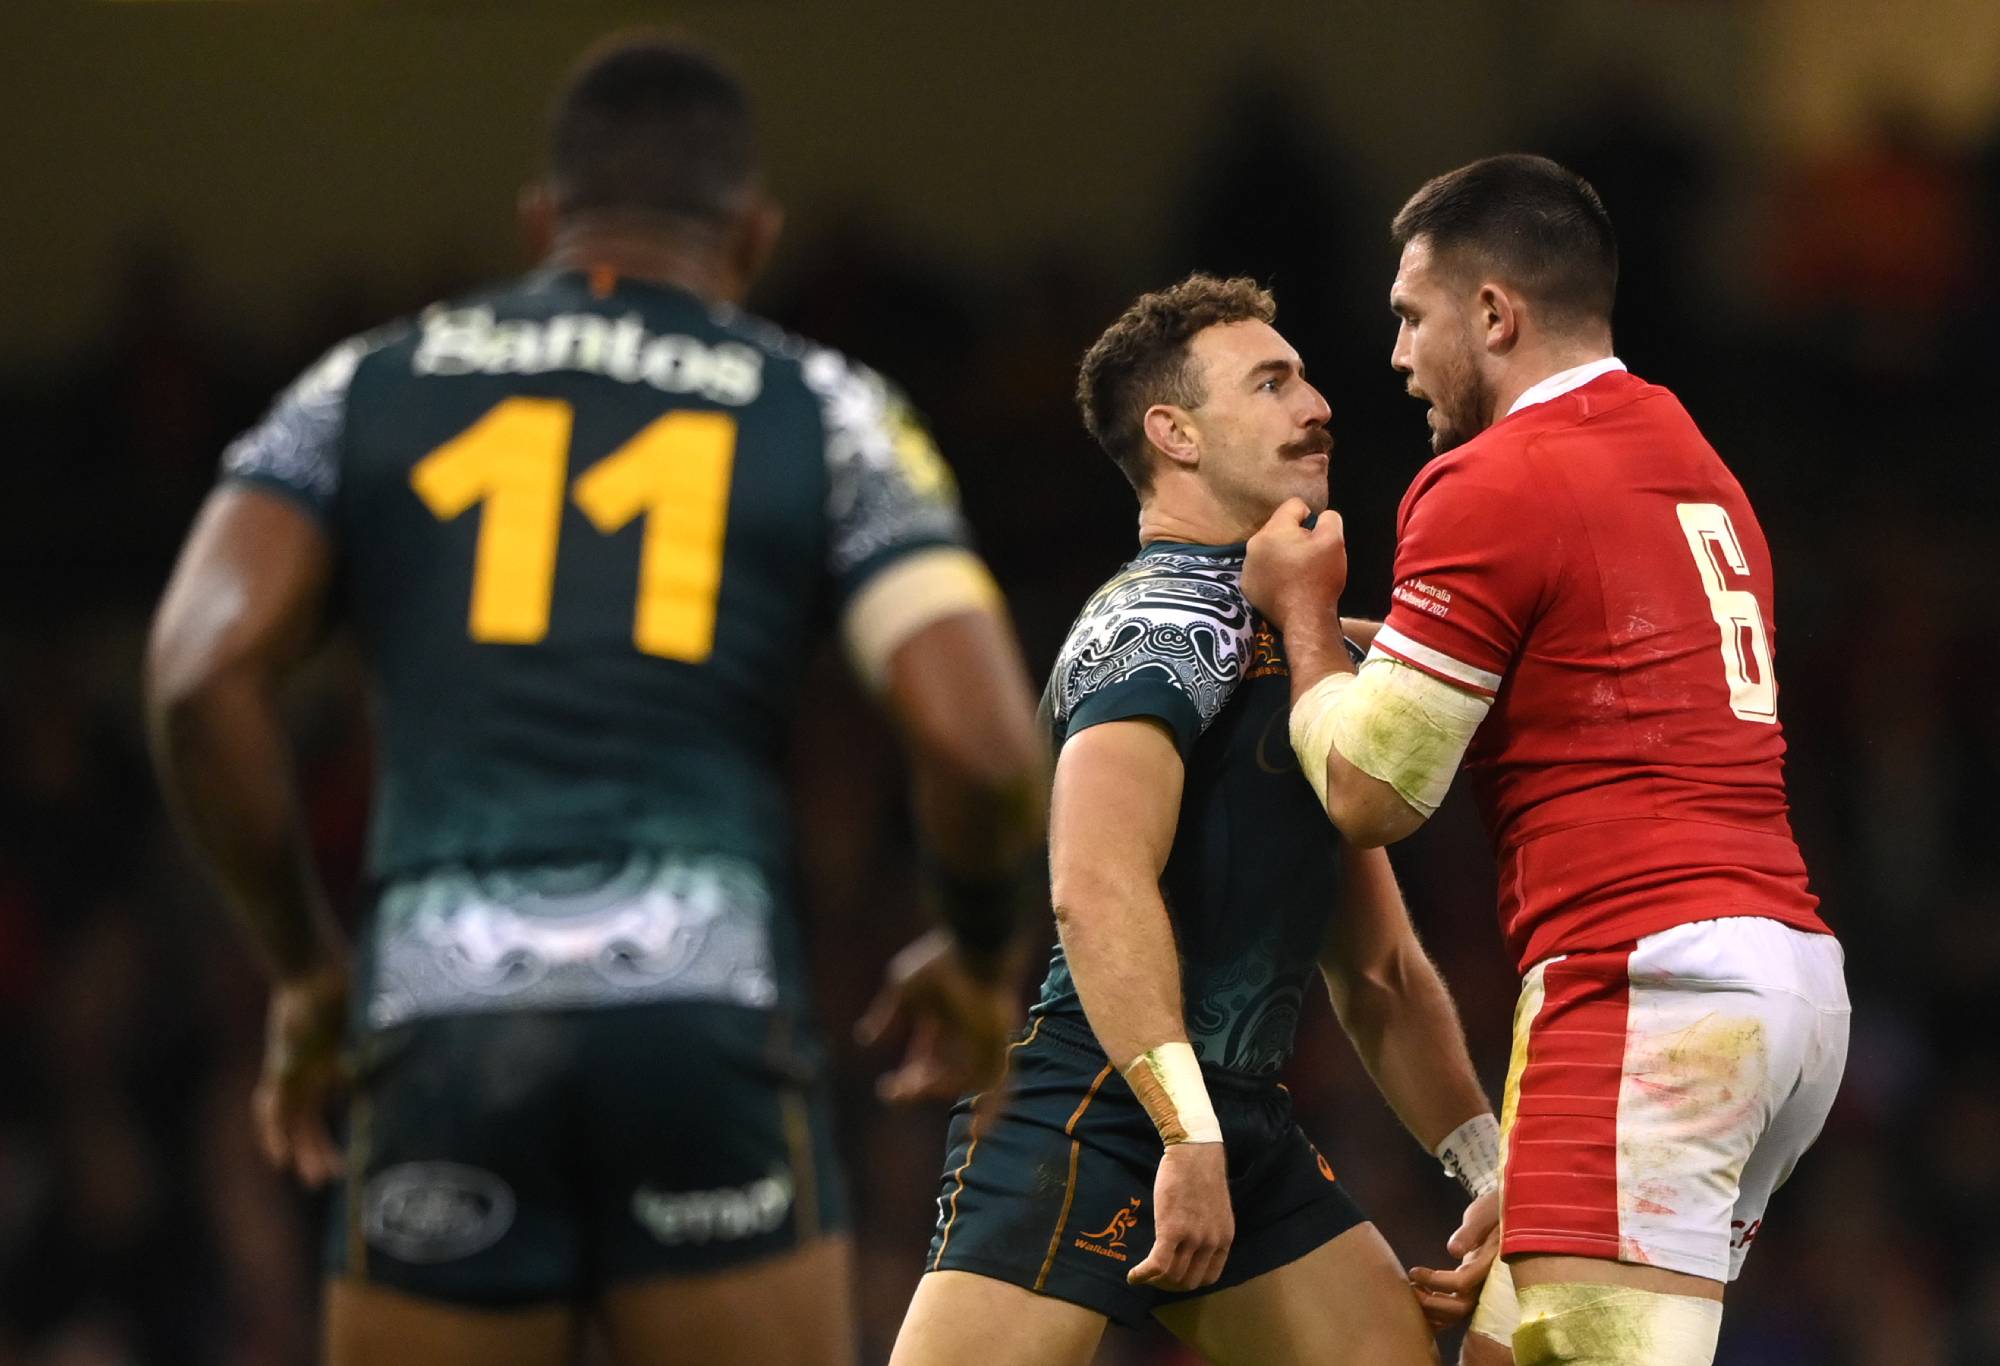 Wales flanker Ellis Jenkins gets to grips with Wallabies scrum half Nic White during the Autumn Nations Series match between Wales and Australia at Principality Stadium on November 20, 2021 in Cardiff, Wales. (Photo by Stu Forster/Getty Images)